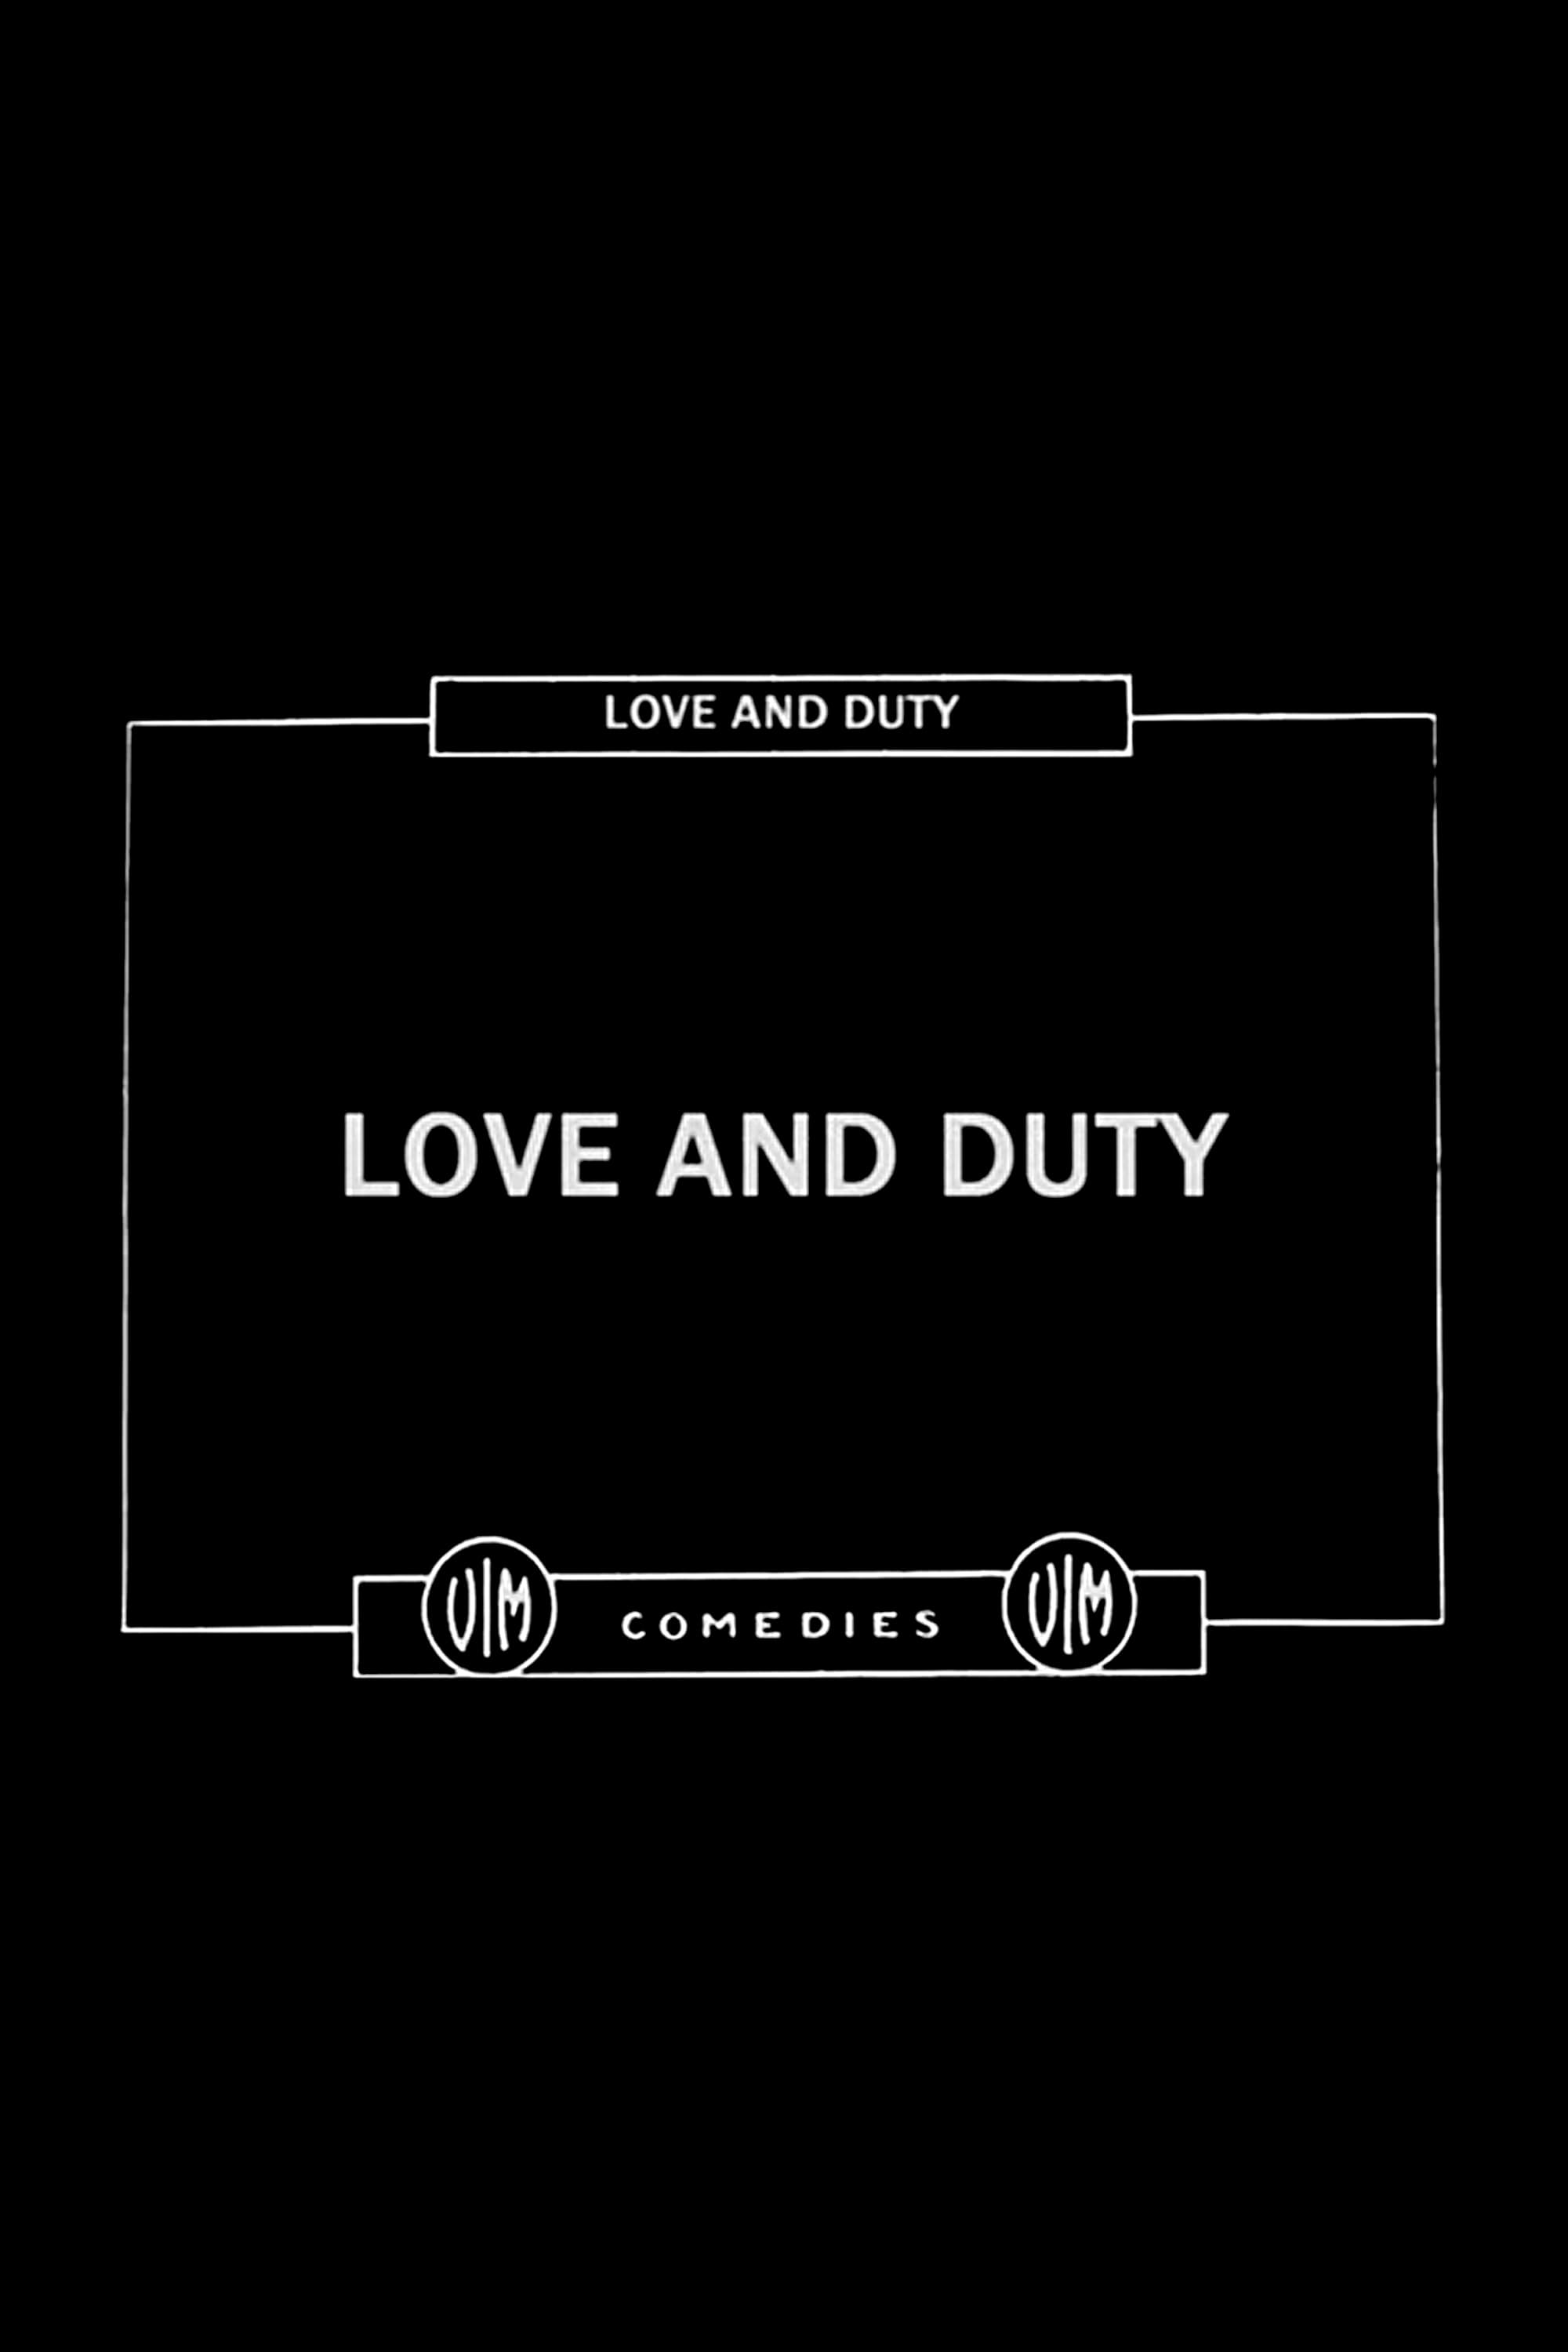 Love and Duty streaming